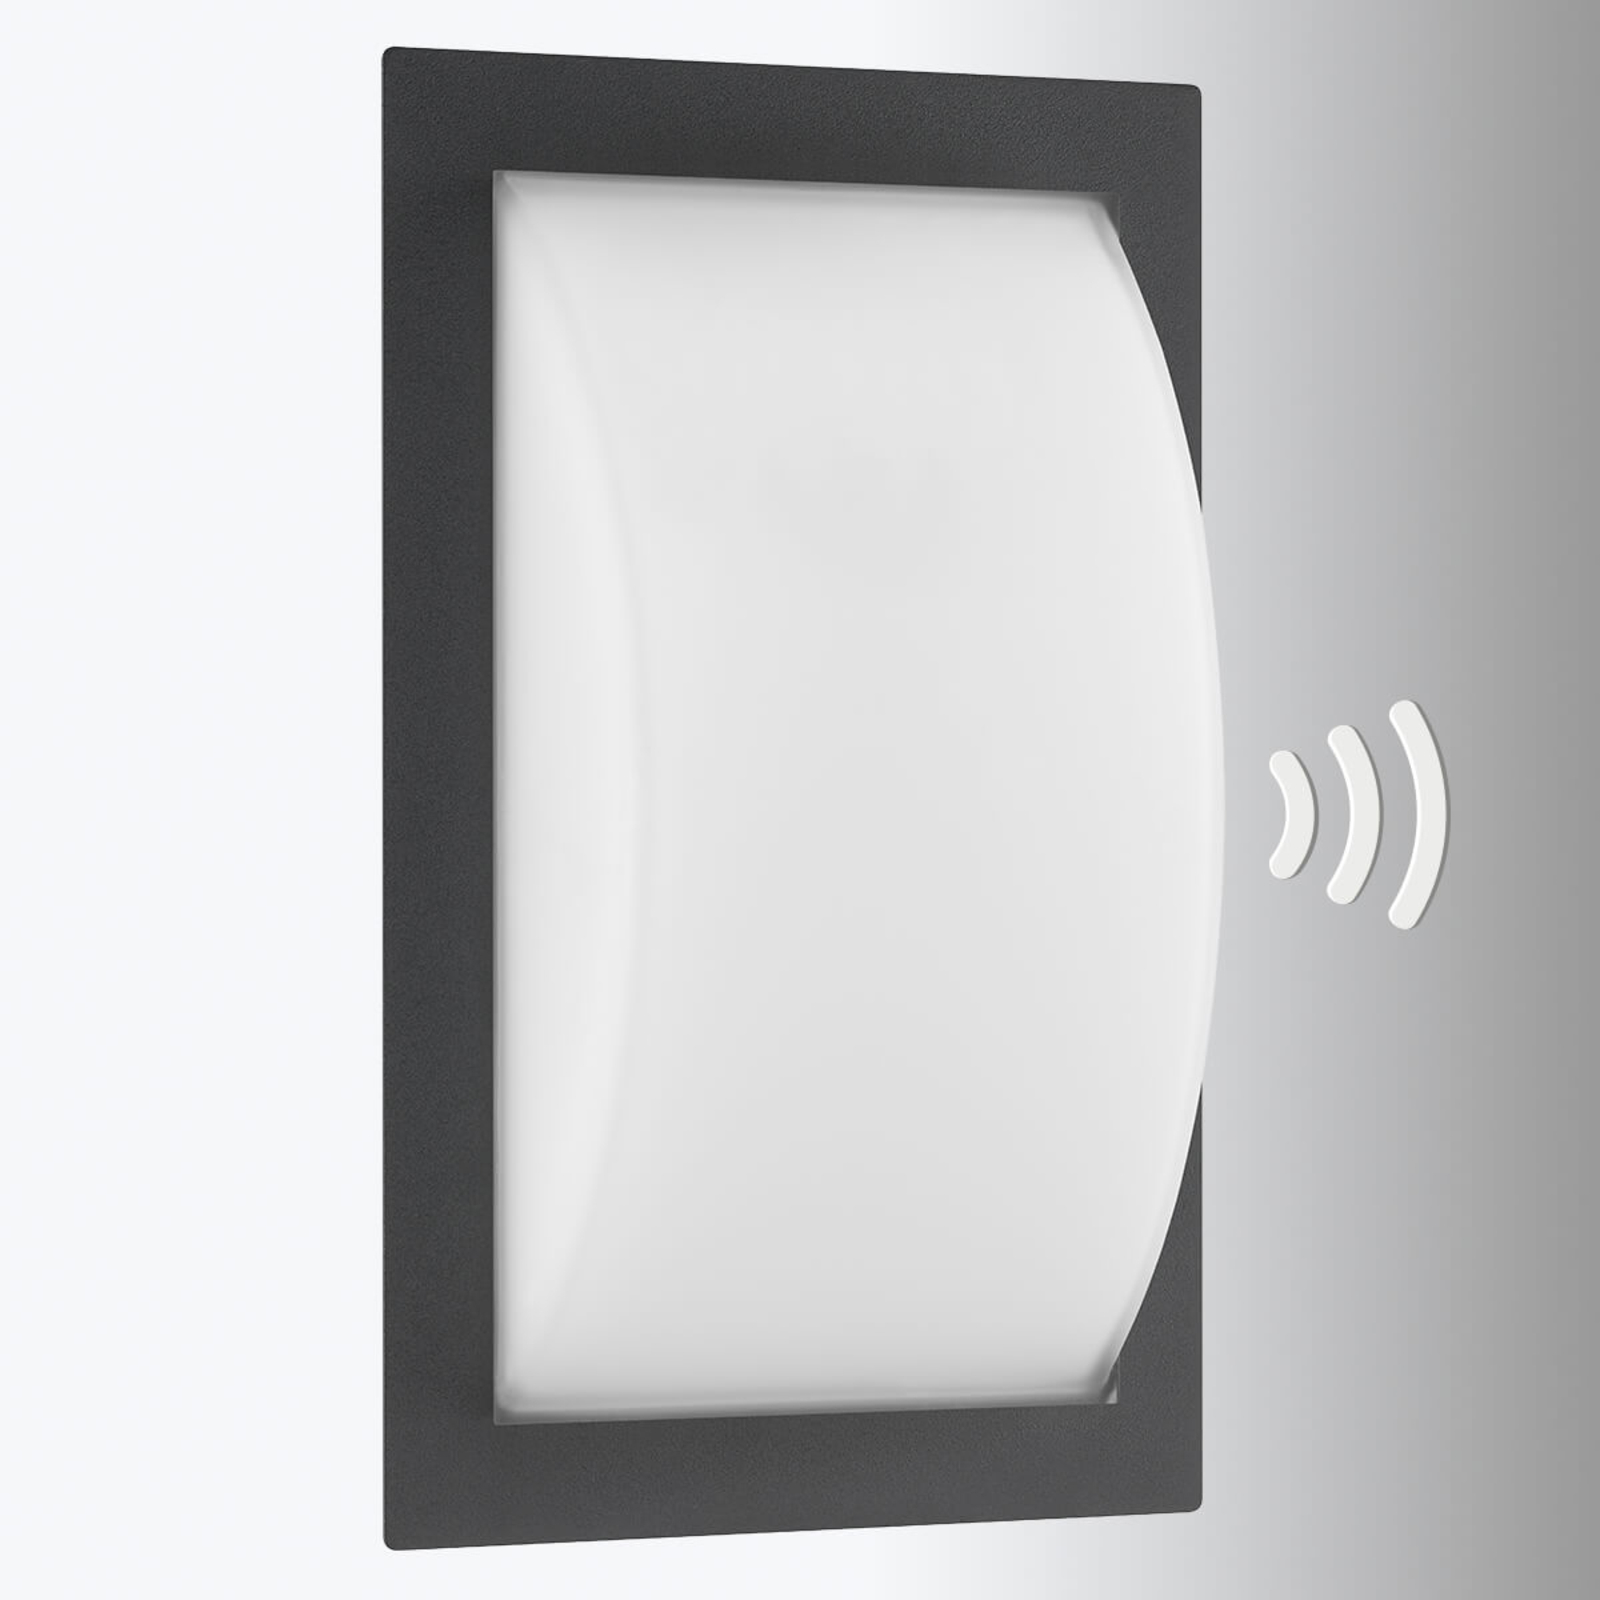 LED outdoor wall light Ivett graphite with motion detector